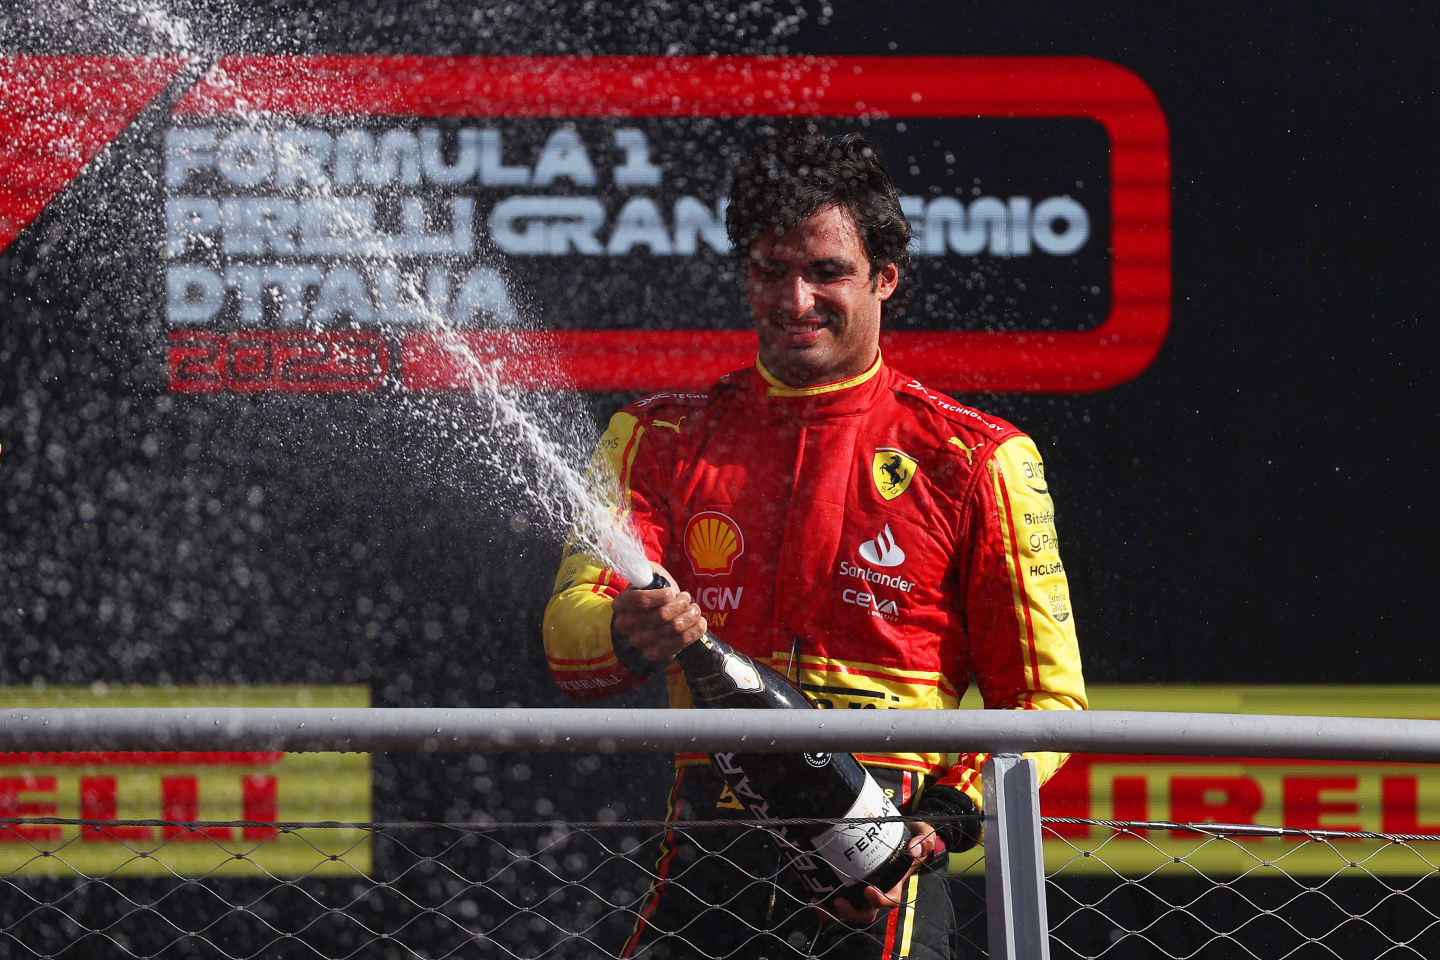 MONZA, ITALY - SEPTEMBER 03: Third placed Carlos Sainz of Spain and Ferrari celebrates on the podium during the F1 Grand Prix of Italy at Autodromo Nazionale Monza on September 03, 2023 in Monza, Italy. (Photo by Ryan Pierse/Getty Images)